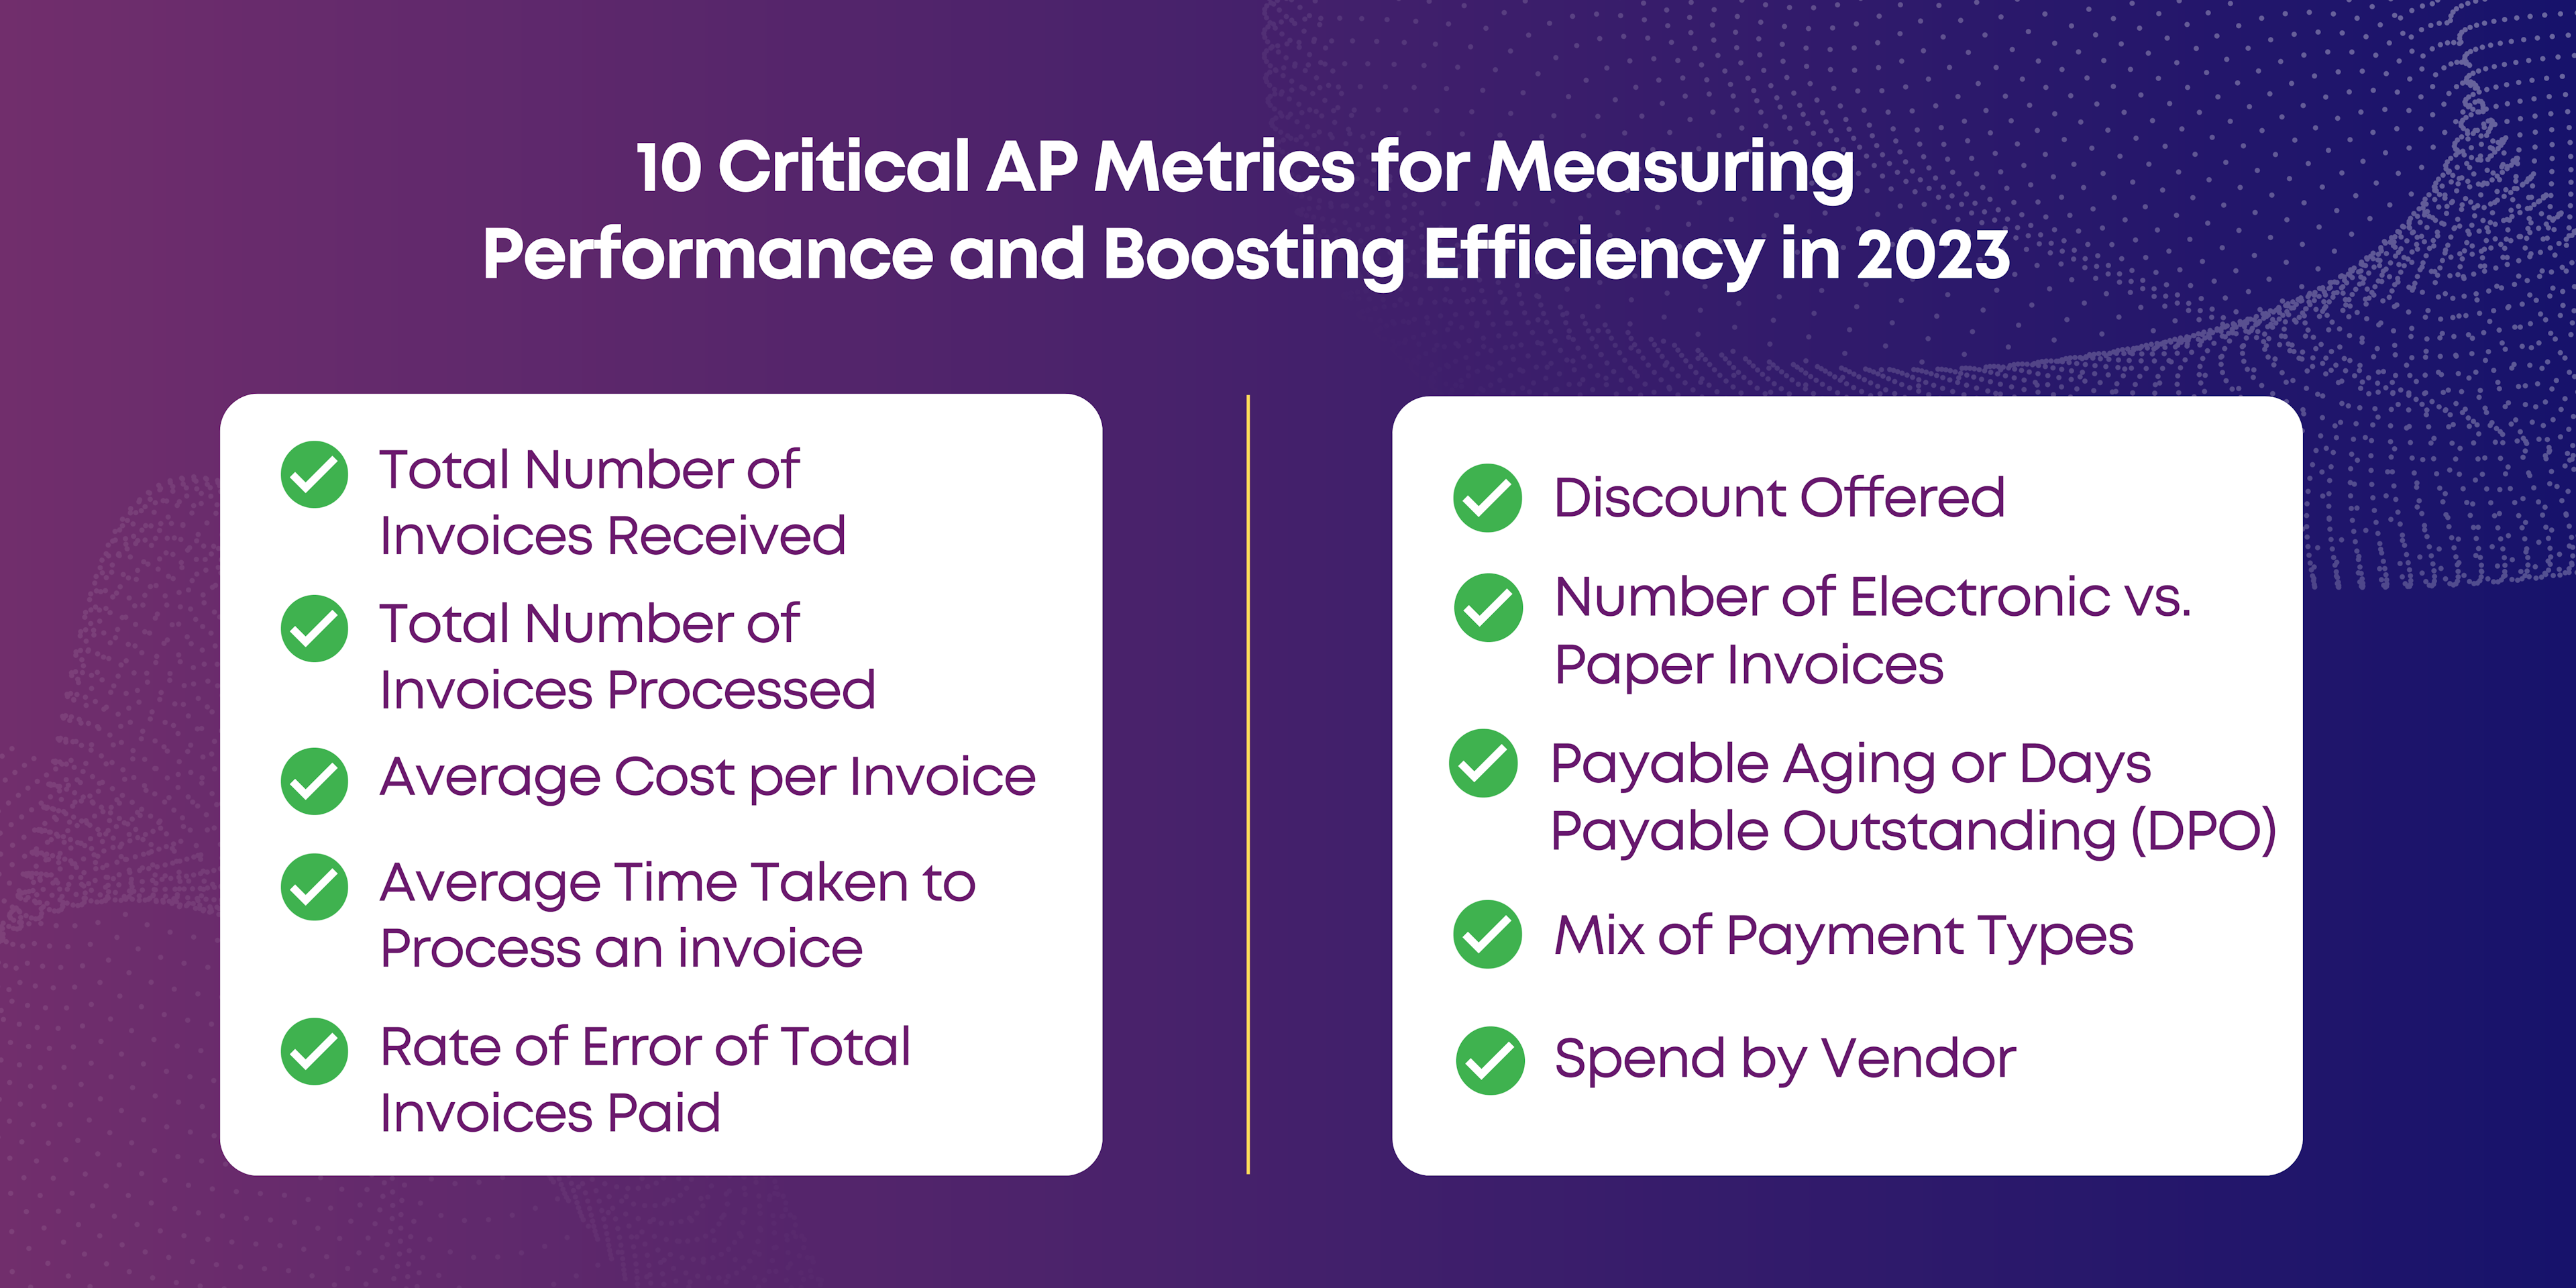 Empower your AP team with the right tools: Leverage AP metrics to boost efficiency and profitability